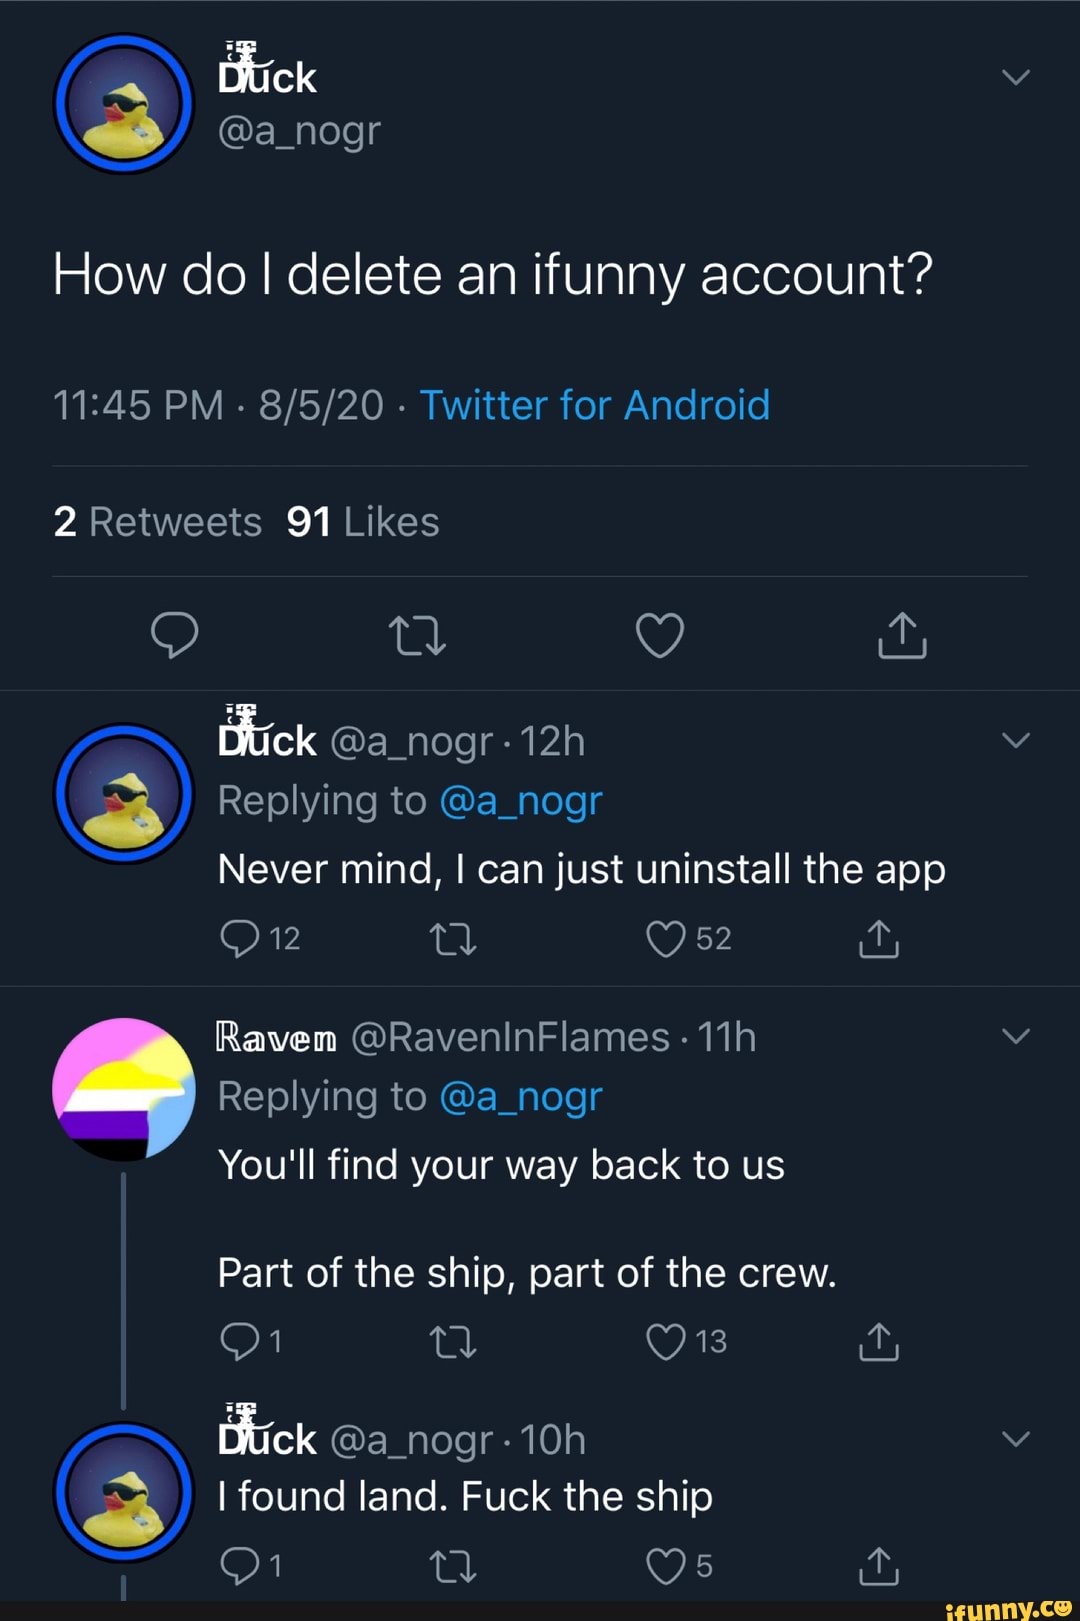 Btick @a_nogr How do I delete an ifunny account? PM - - Twitter